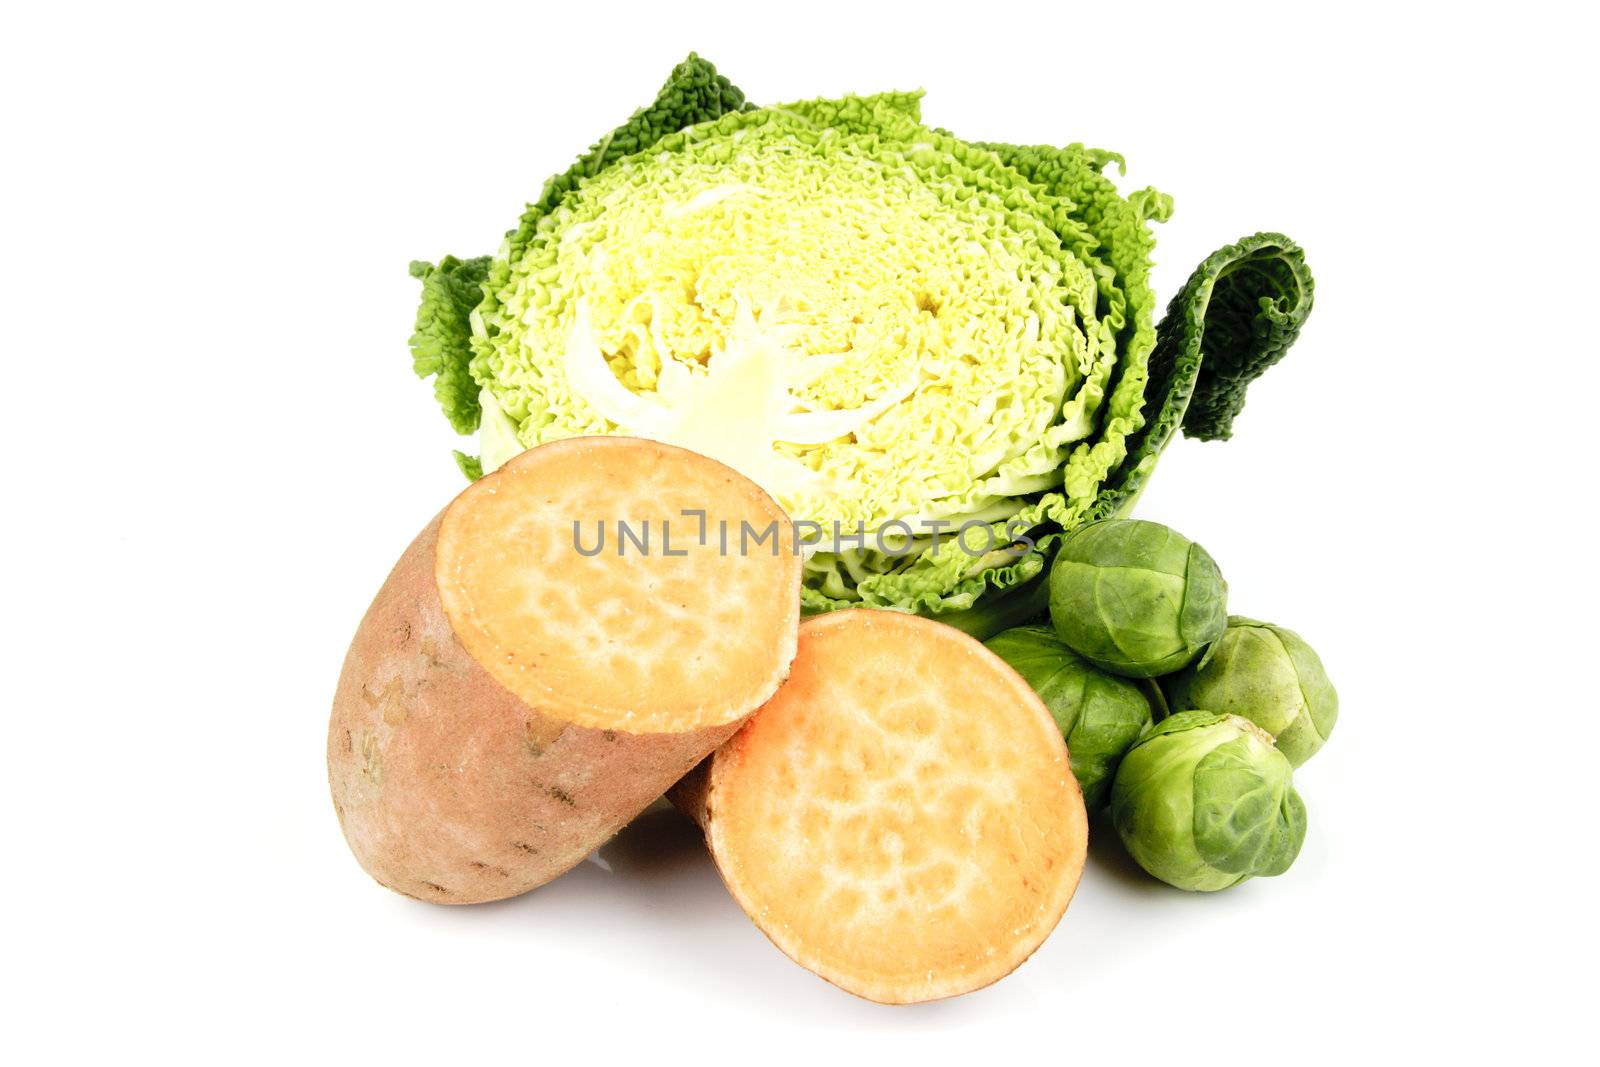 Half a raw green cabbage with a sweet potato cut in half and a pile of green sprouts on a reflective white background